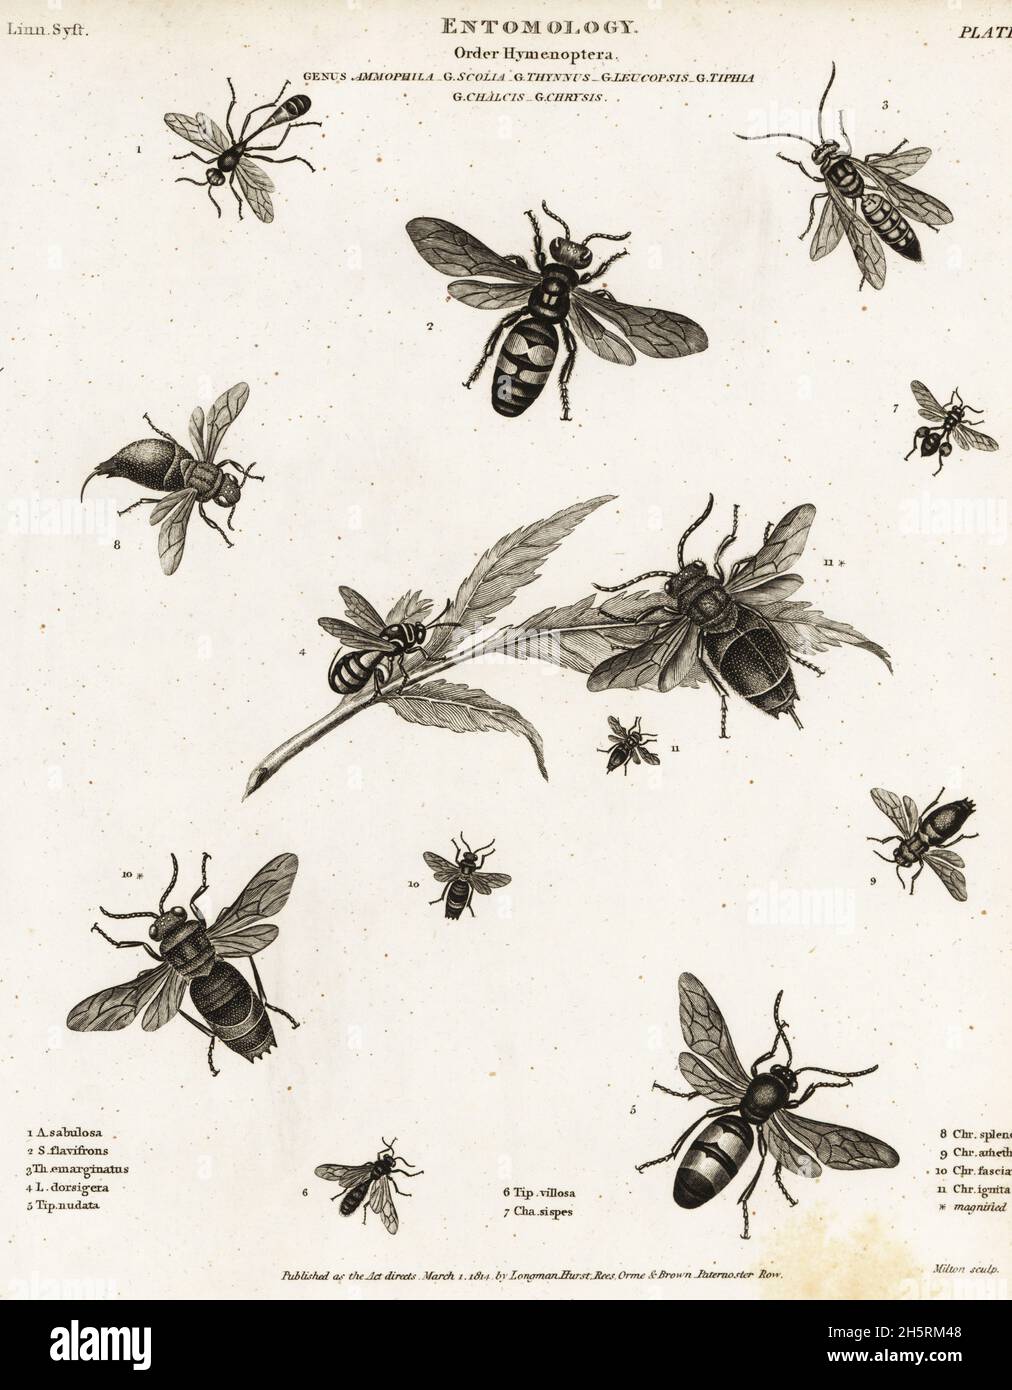 Red-banded sand wasp, Ammophila sabulosa, mammoth wasp, Megascolia maculata, Leucospis dorsigera, etc. Scolia flavifrons. Copperplate engraving by Milton from Abraham Rees' Cyclopedia or Universal Dictionary of Arts, Sciences and Literature, Longman, Hurst, Rees, Orme and Brown, London, 1814. Stock Photo